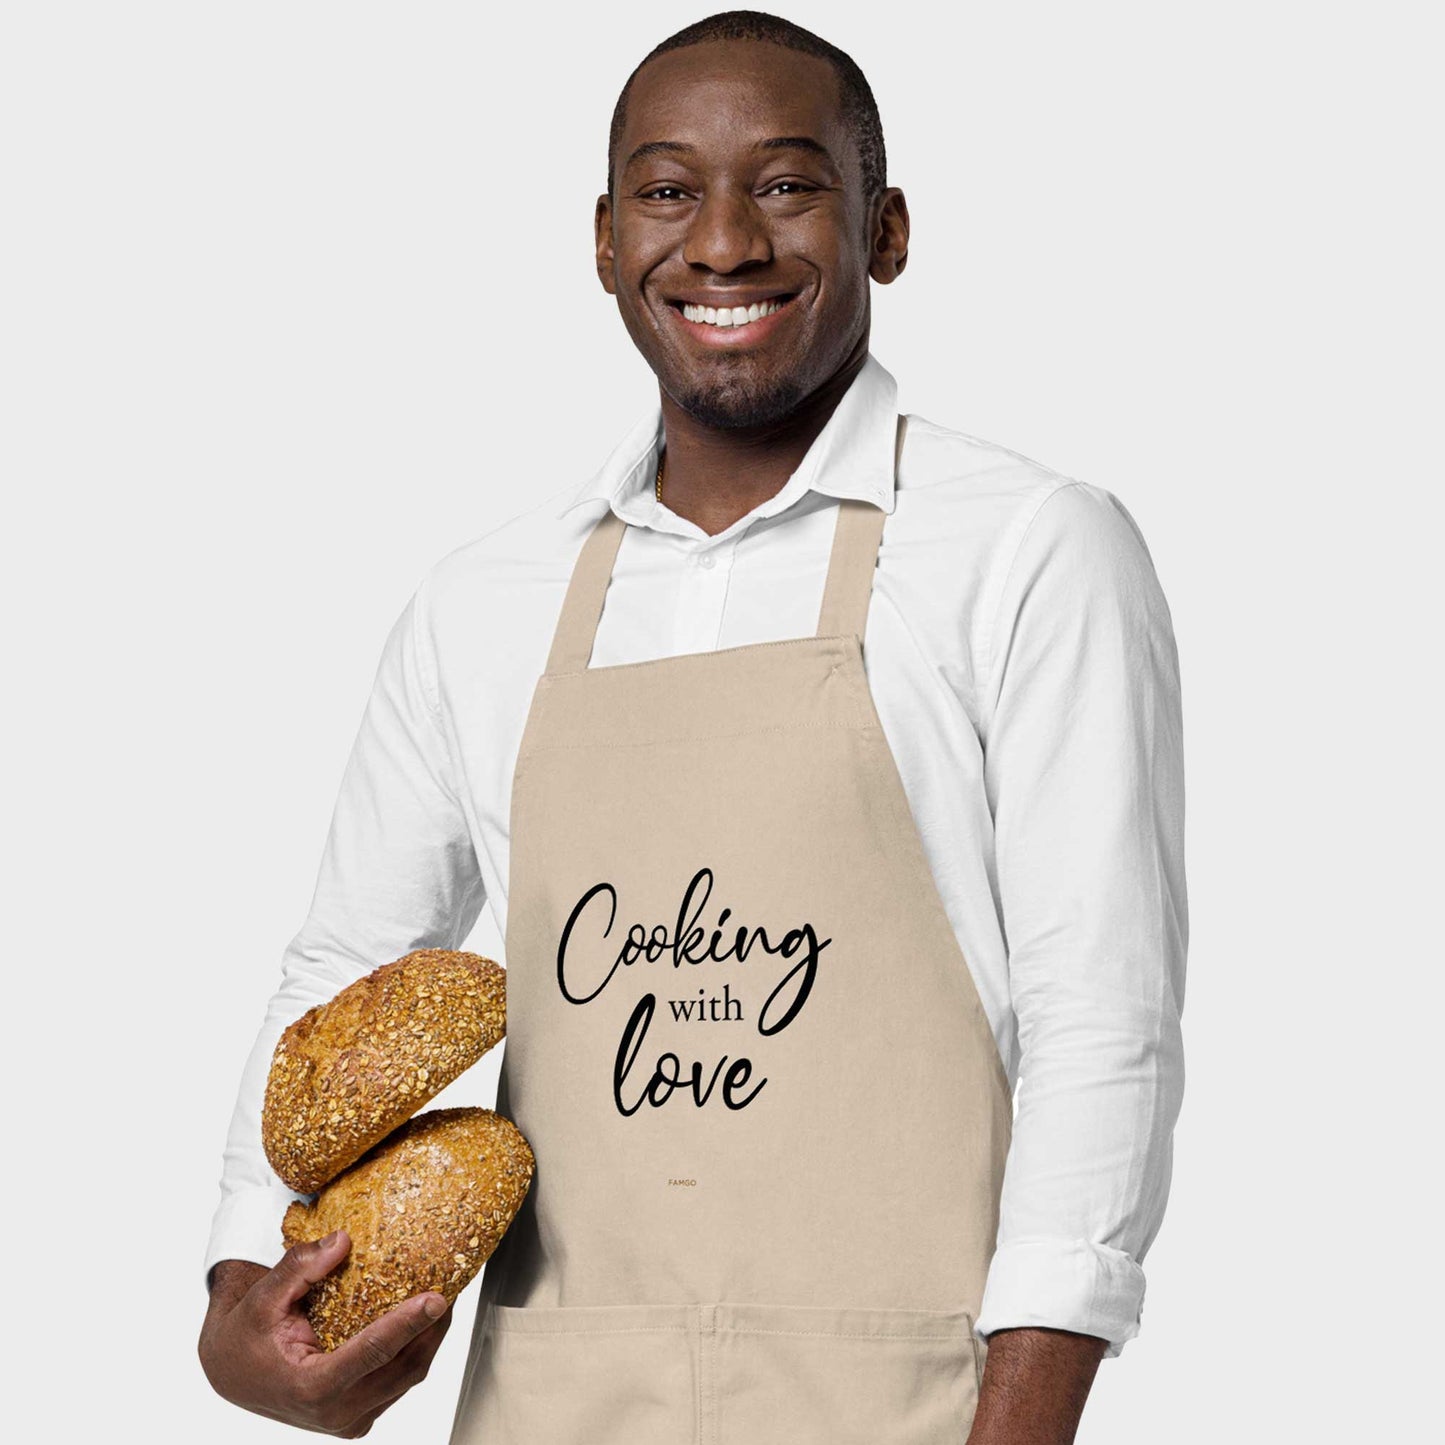 Man wearing a beige "Cooking with Love" inspirational quote 100% organic cotton apron, his right hand holding breads